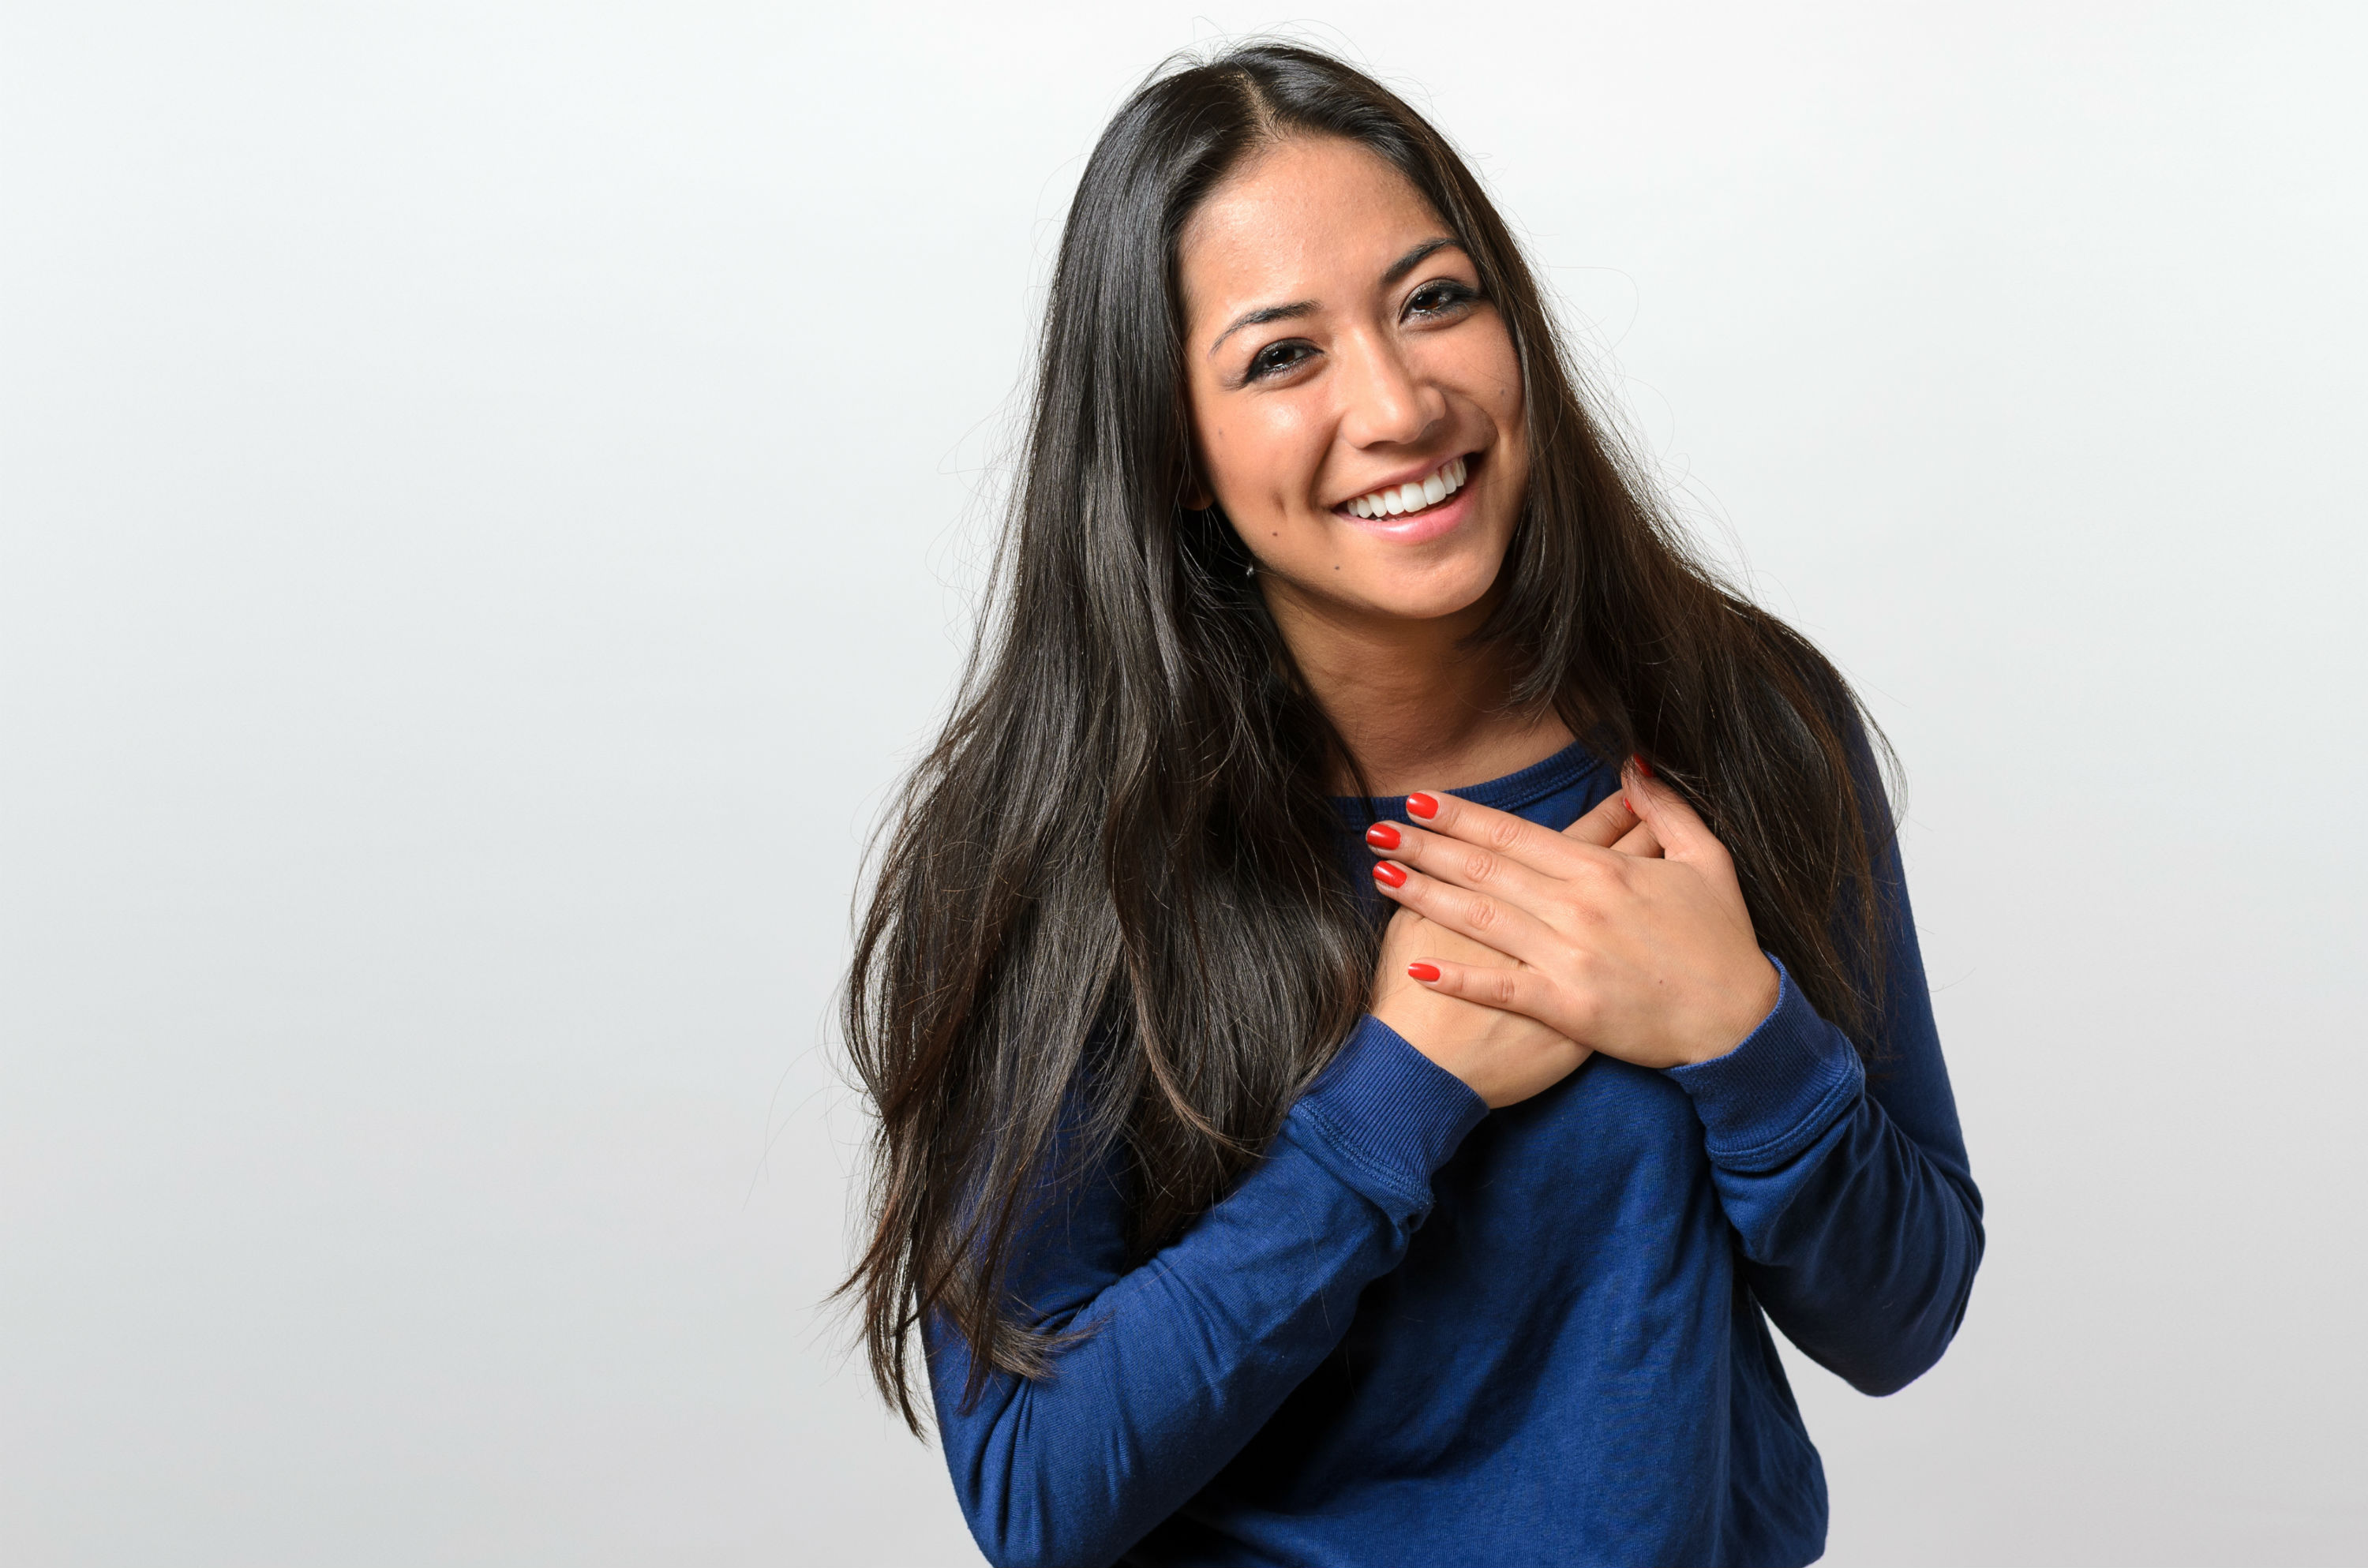 Smiling young woman with hands over heart showing gratitude